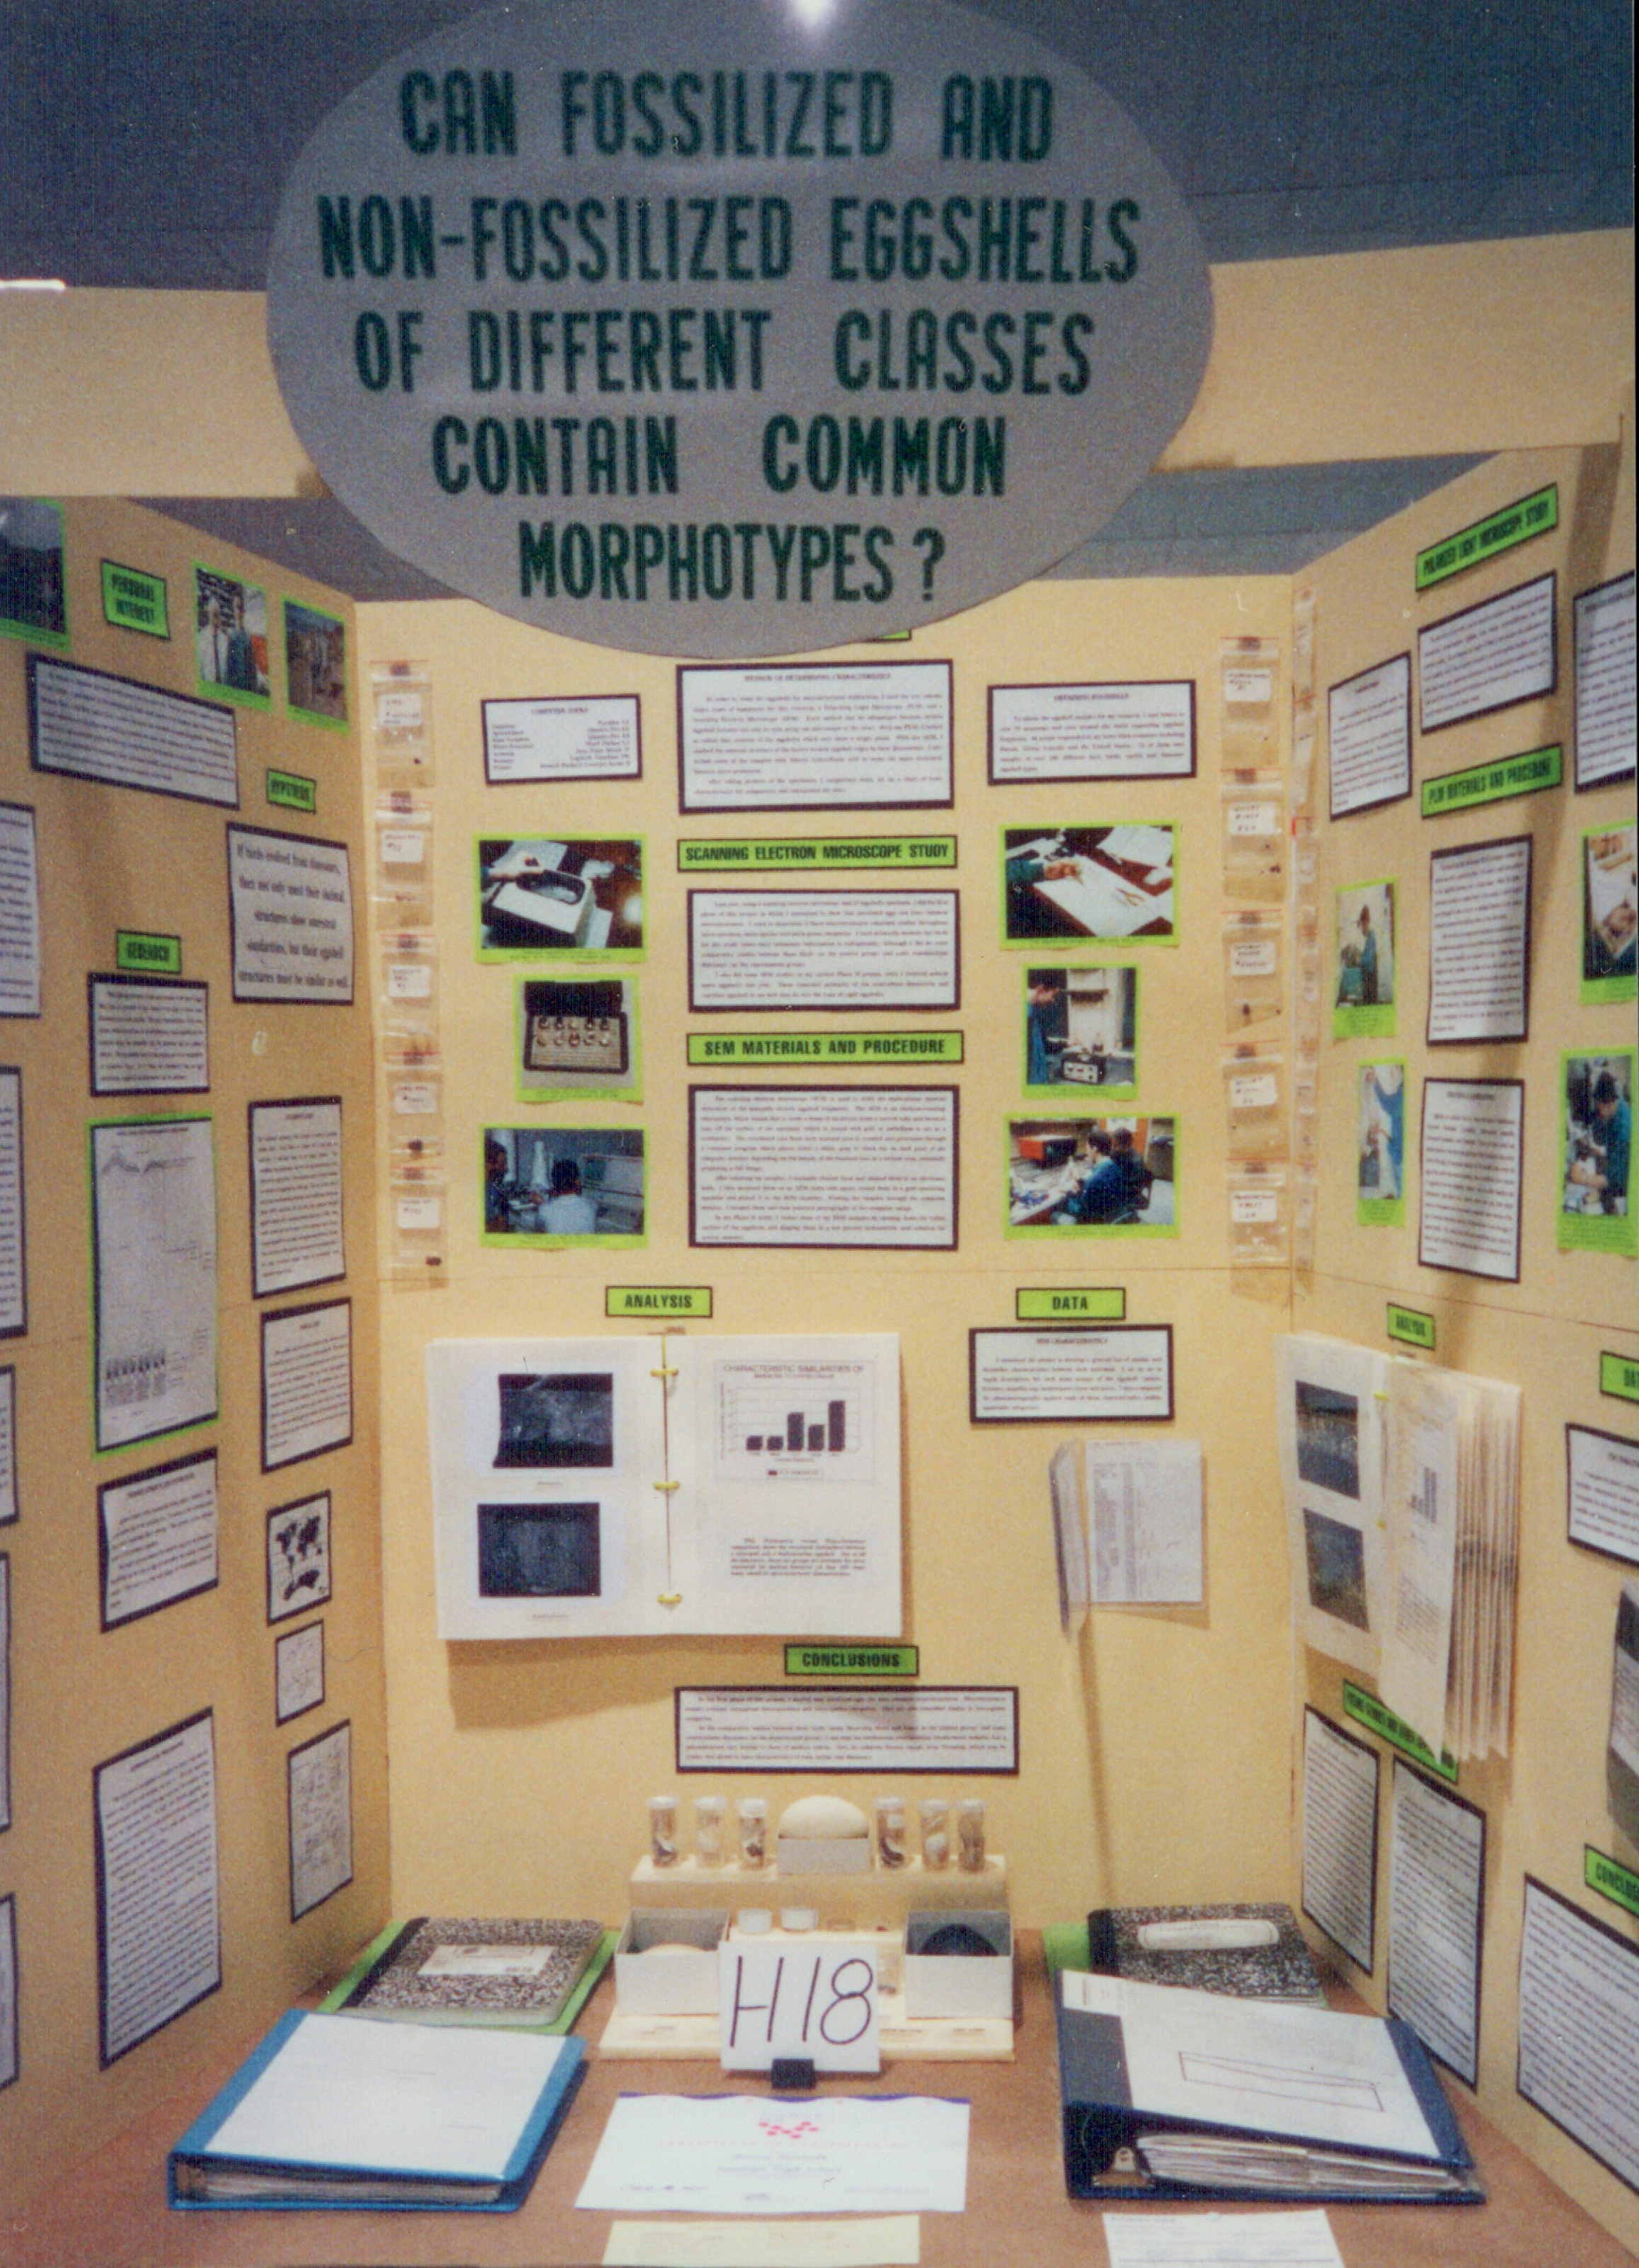 mister-science-fair-display-boards